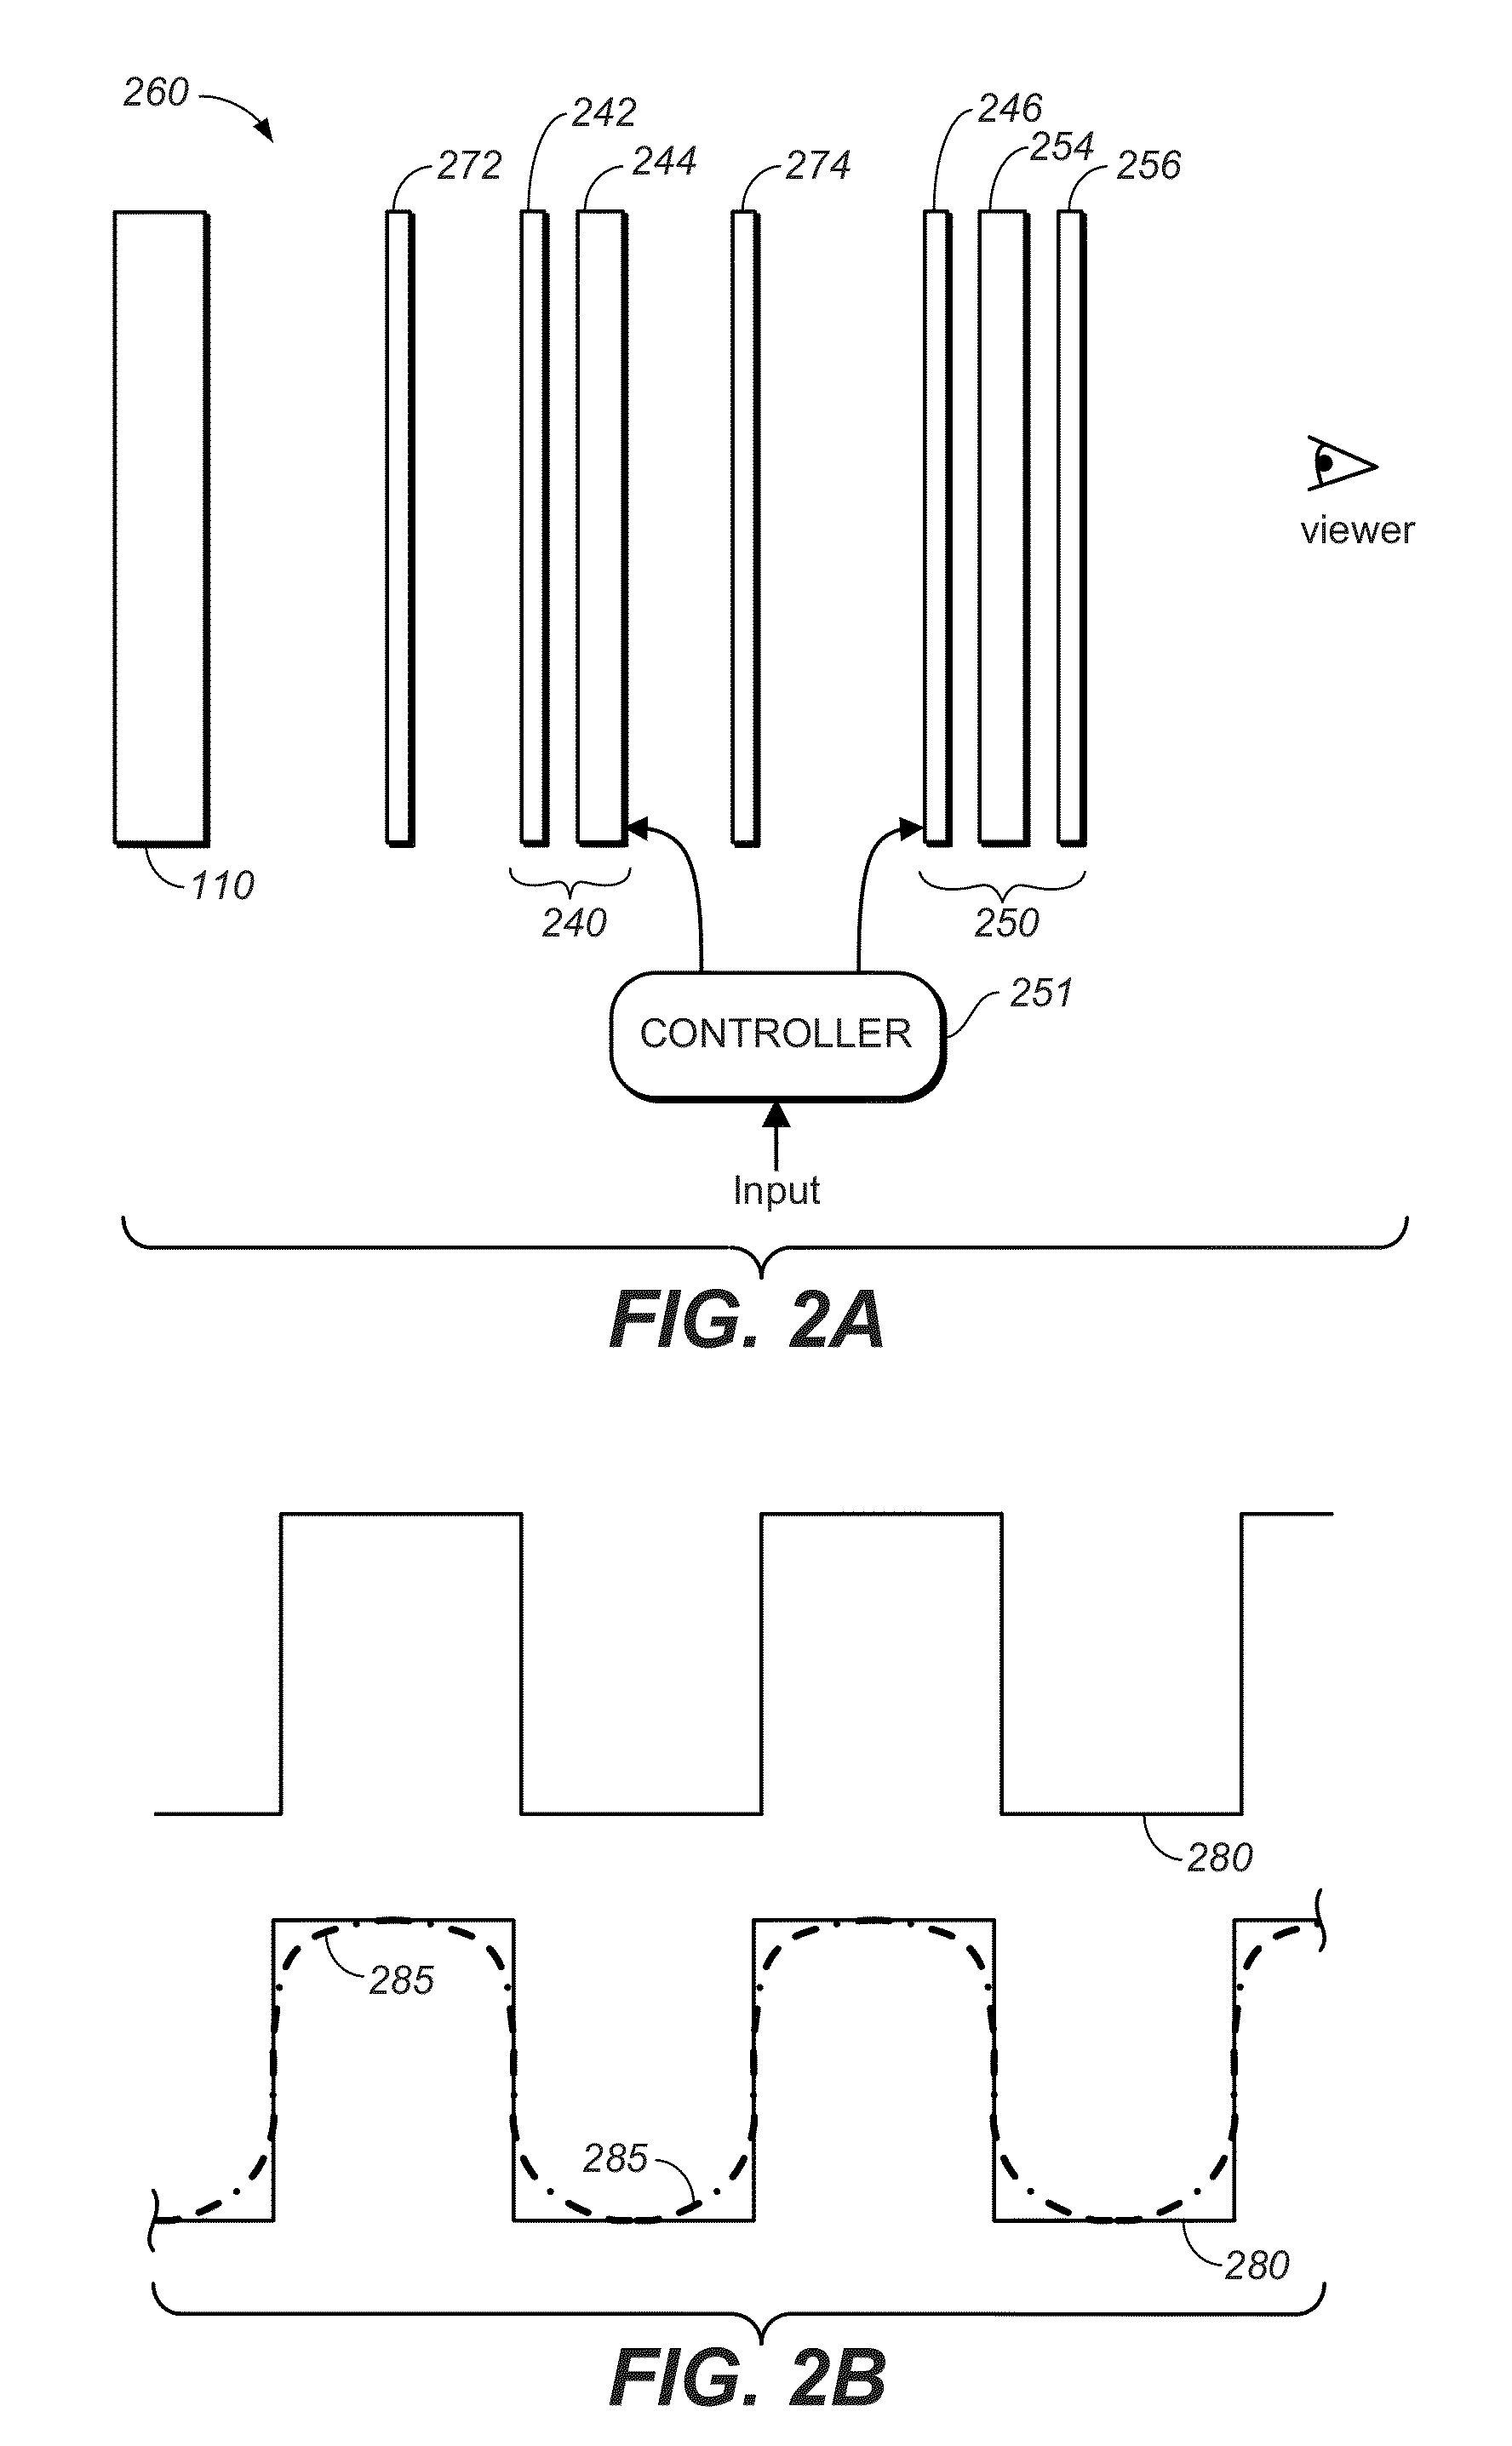 Systems and methods for accurately representing high contrast imagery on high dynamic range display systems